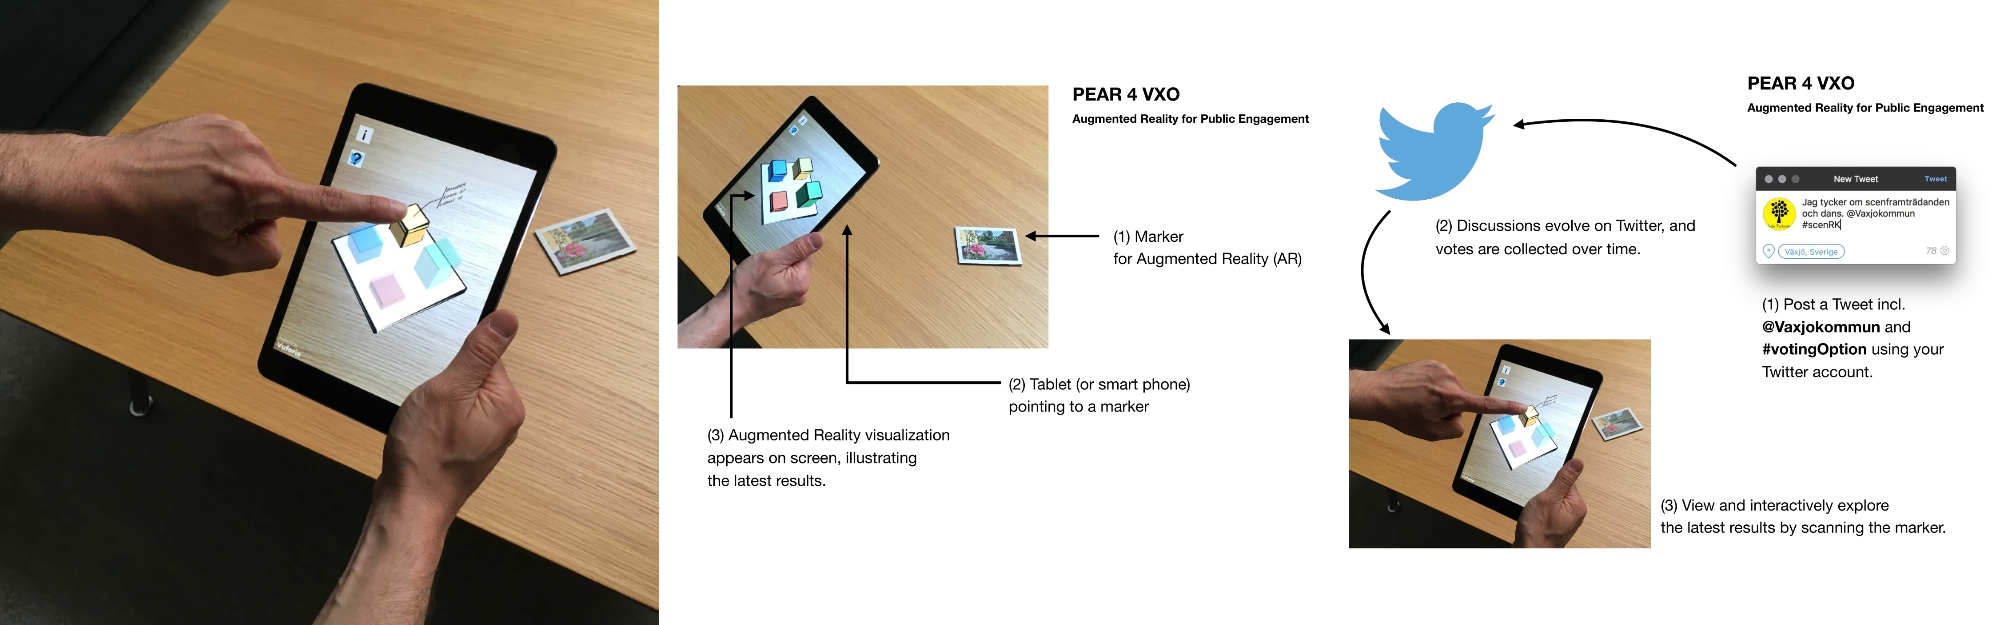 A collage of three images that visually represent the research about Augmented Reality for Public Engagement (PEAR).